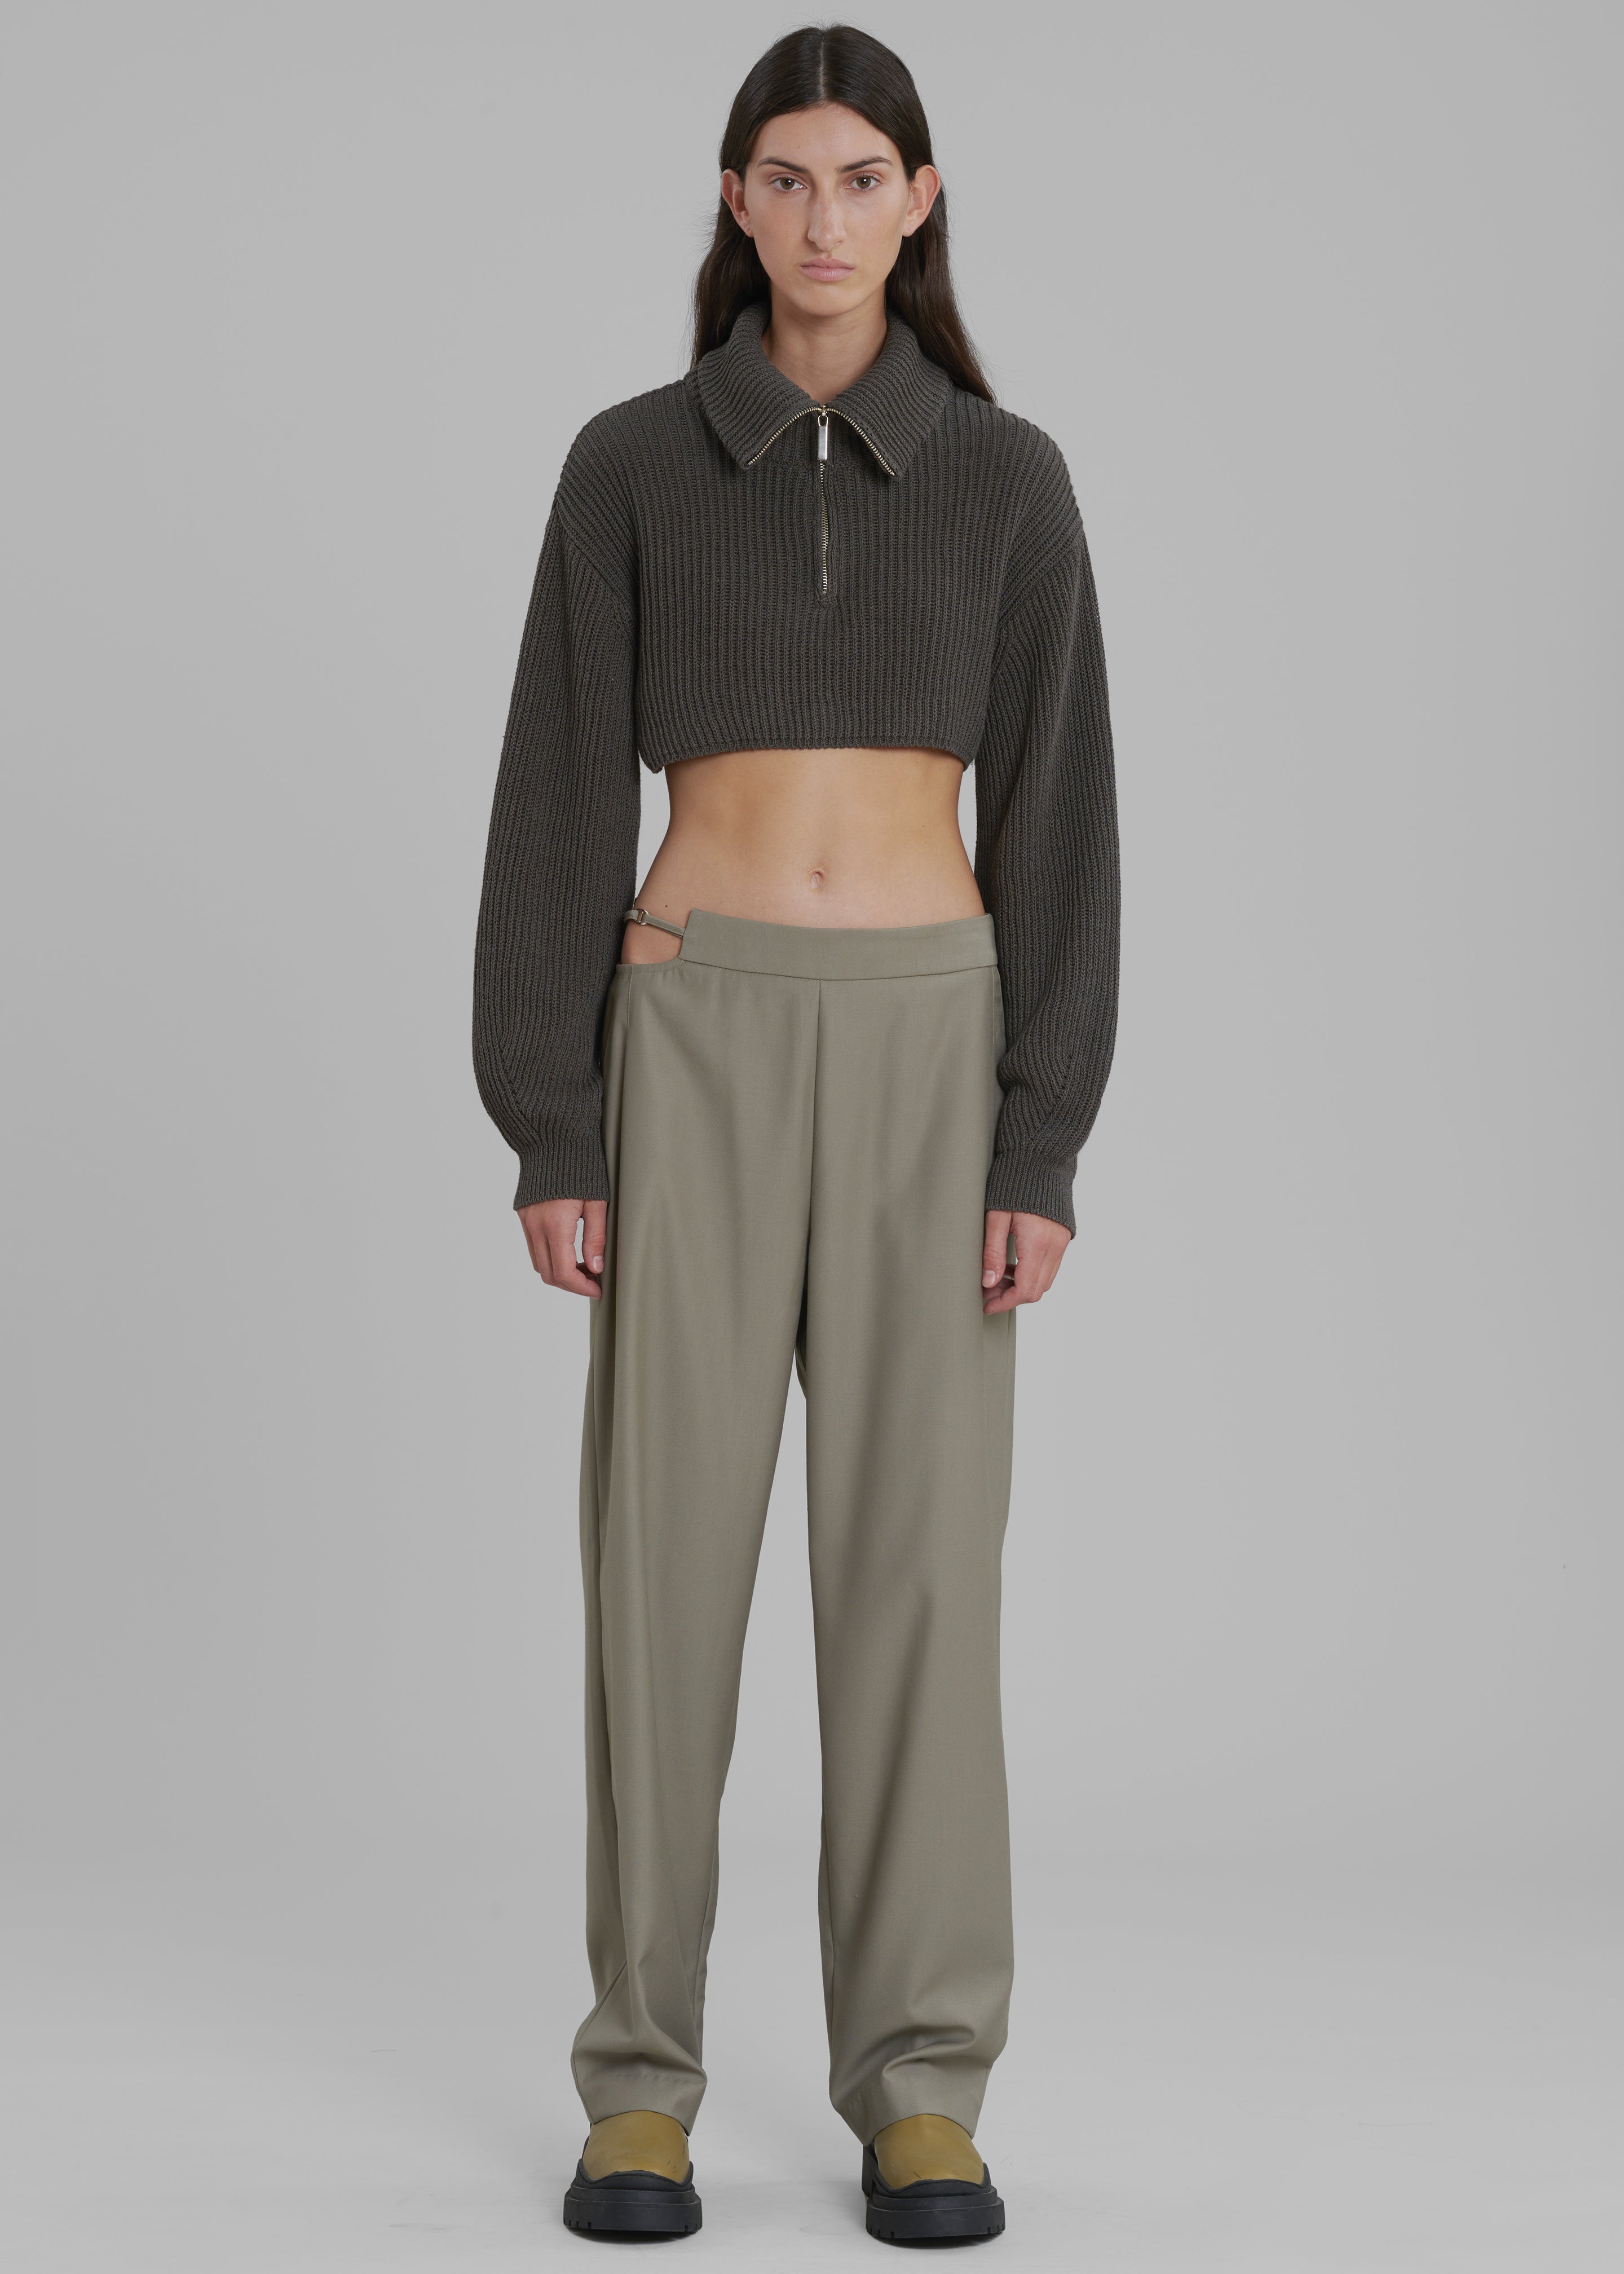 Louise Cut Out Trousers - Olive - 4